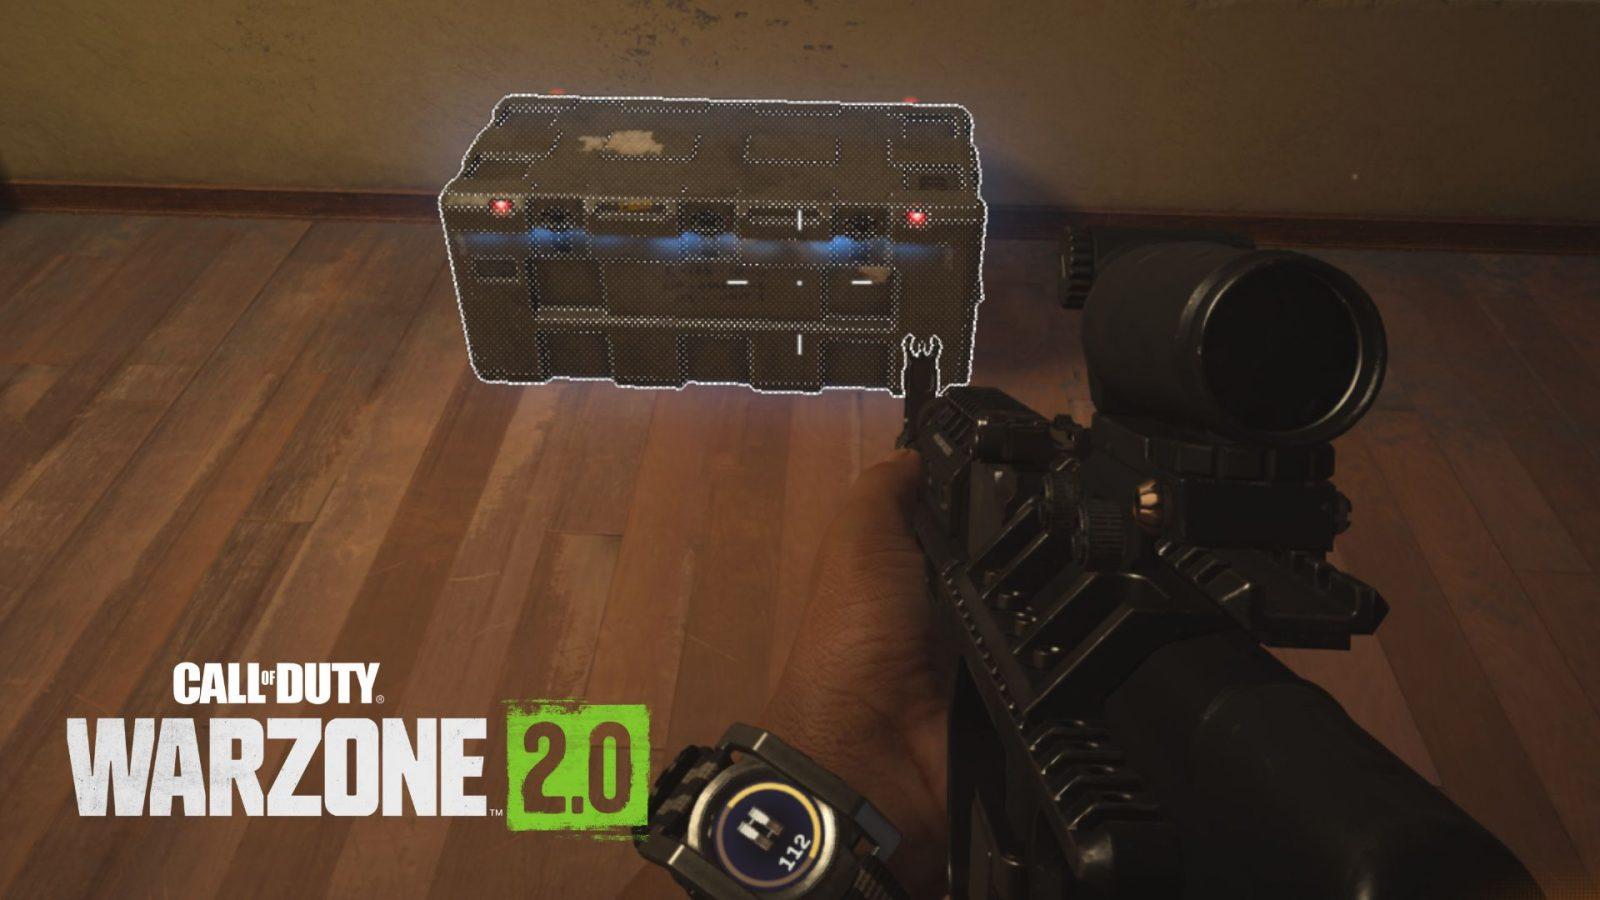 player looking at loot box in warzone 2